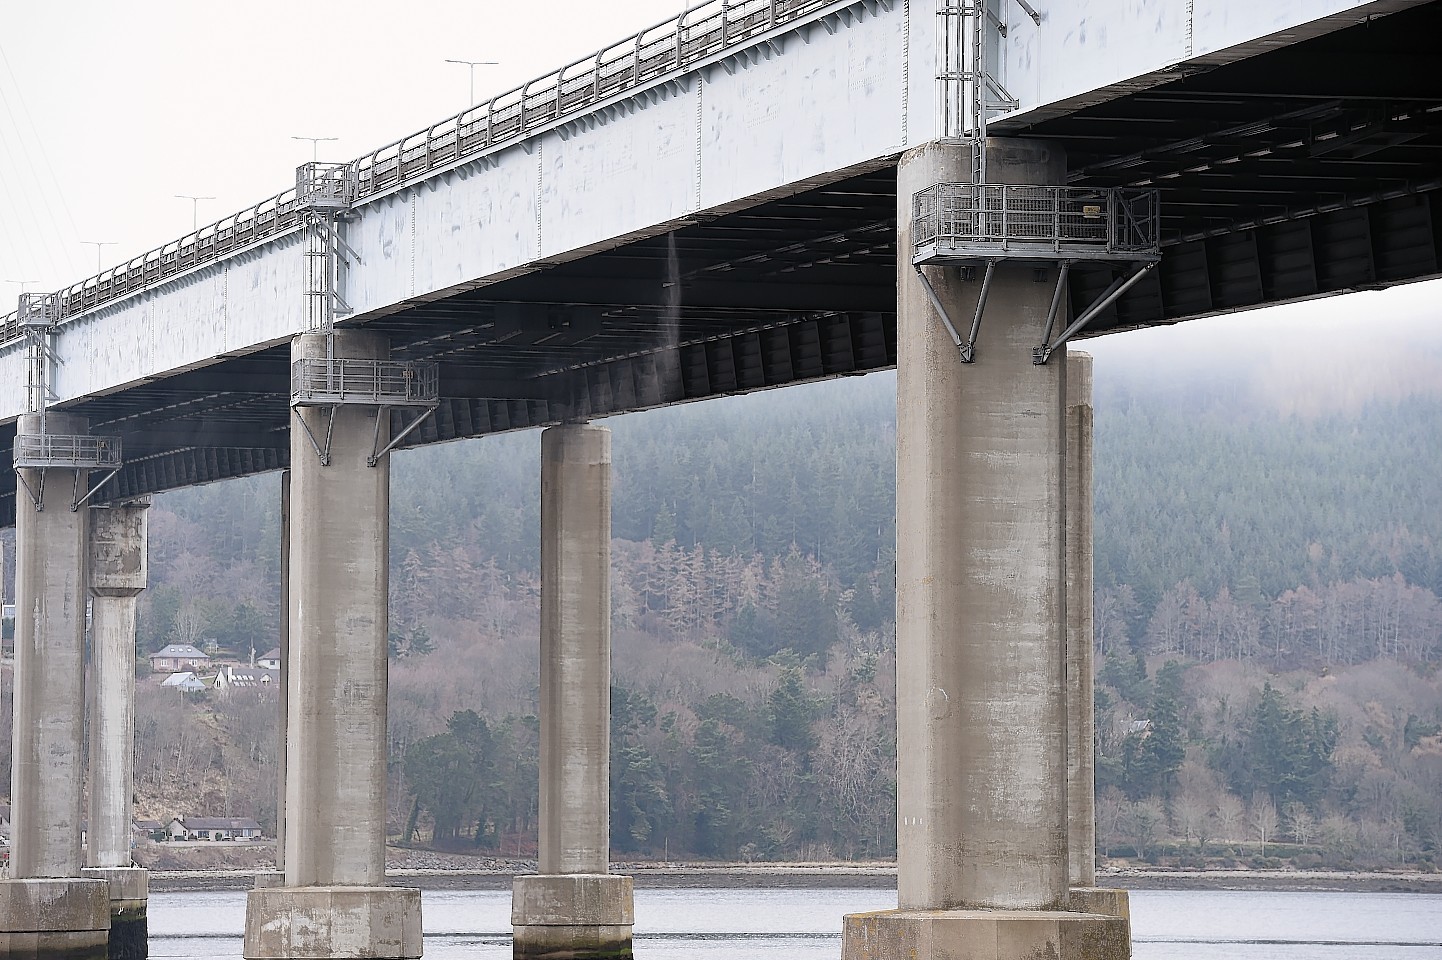 Water pours under pressure from a water pipe beneath the Kessock Bridge